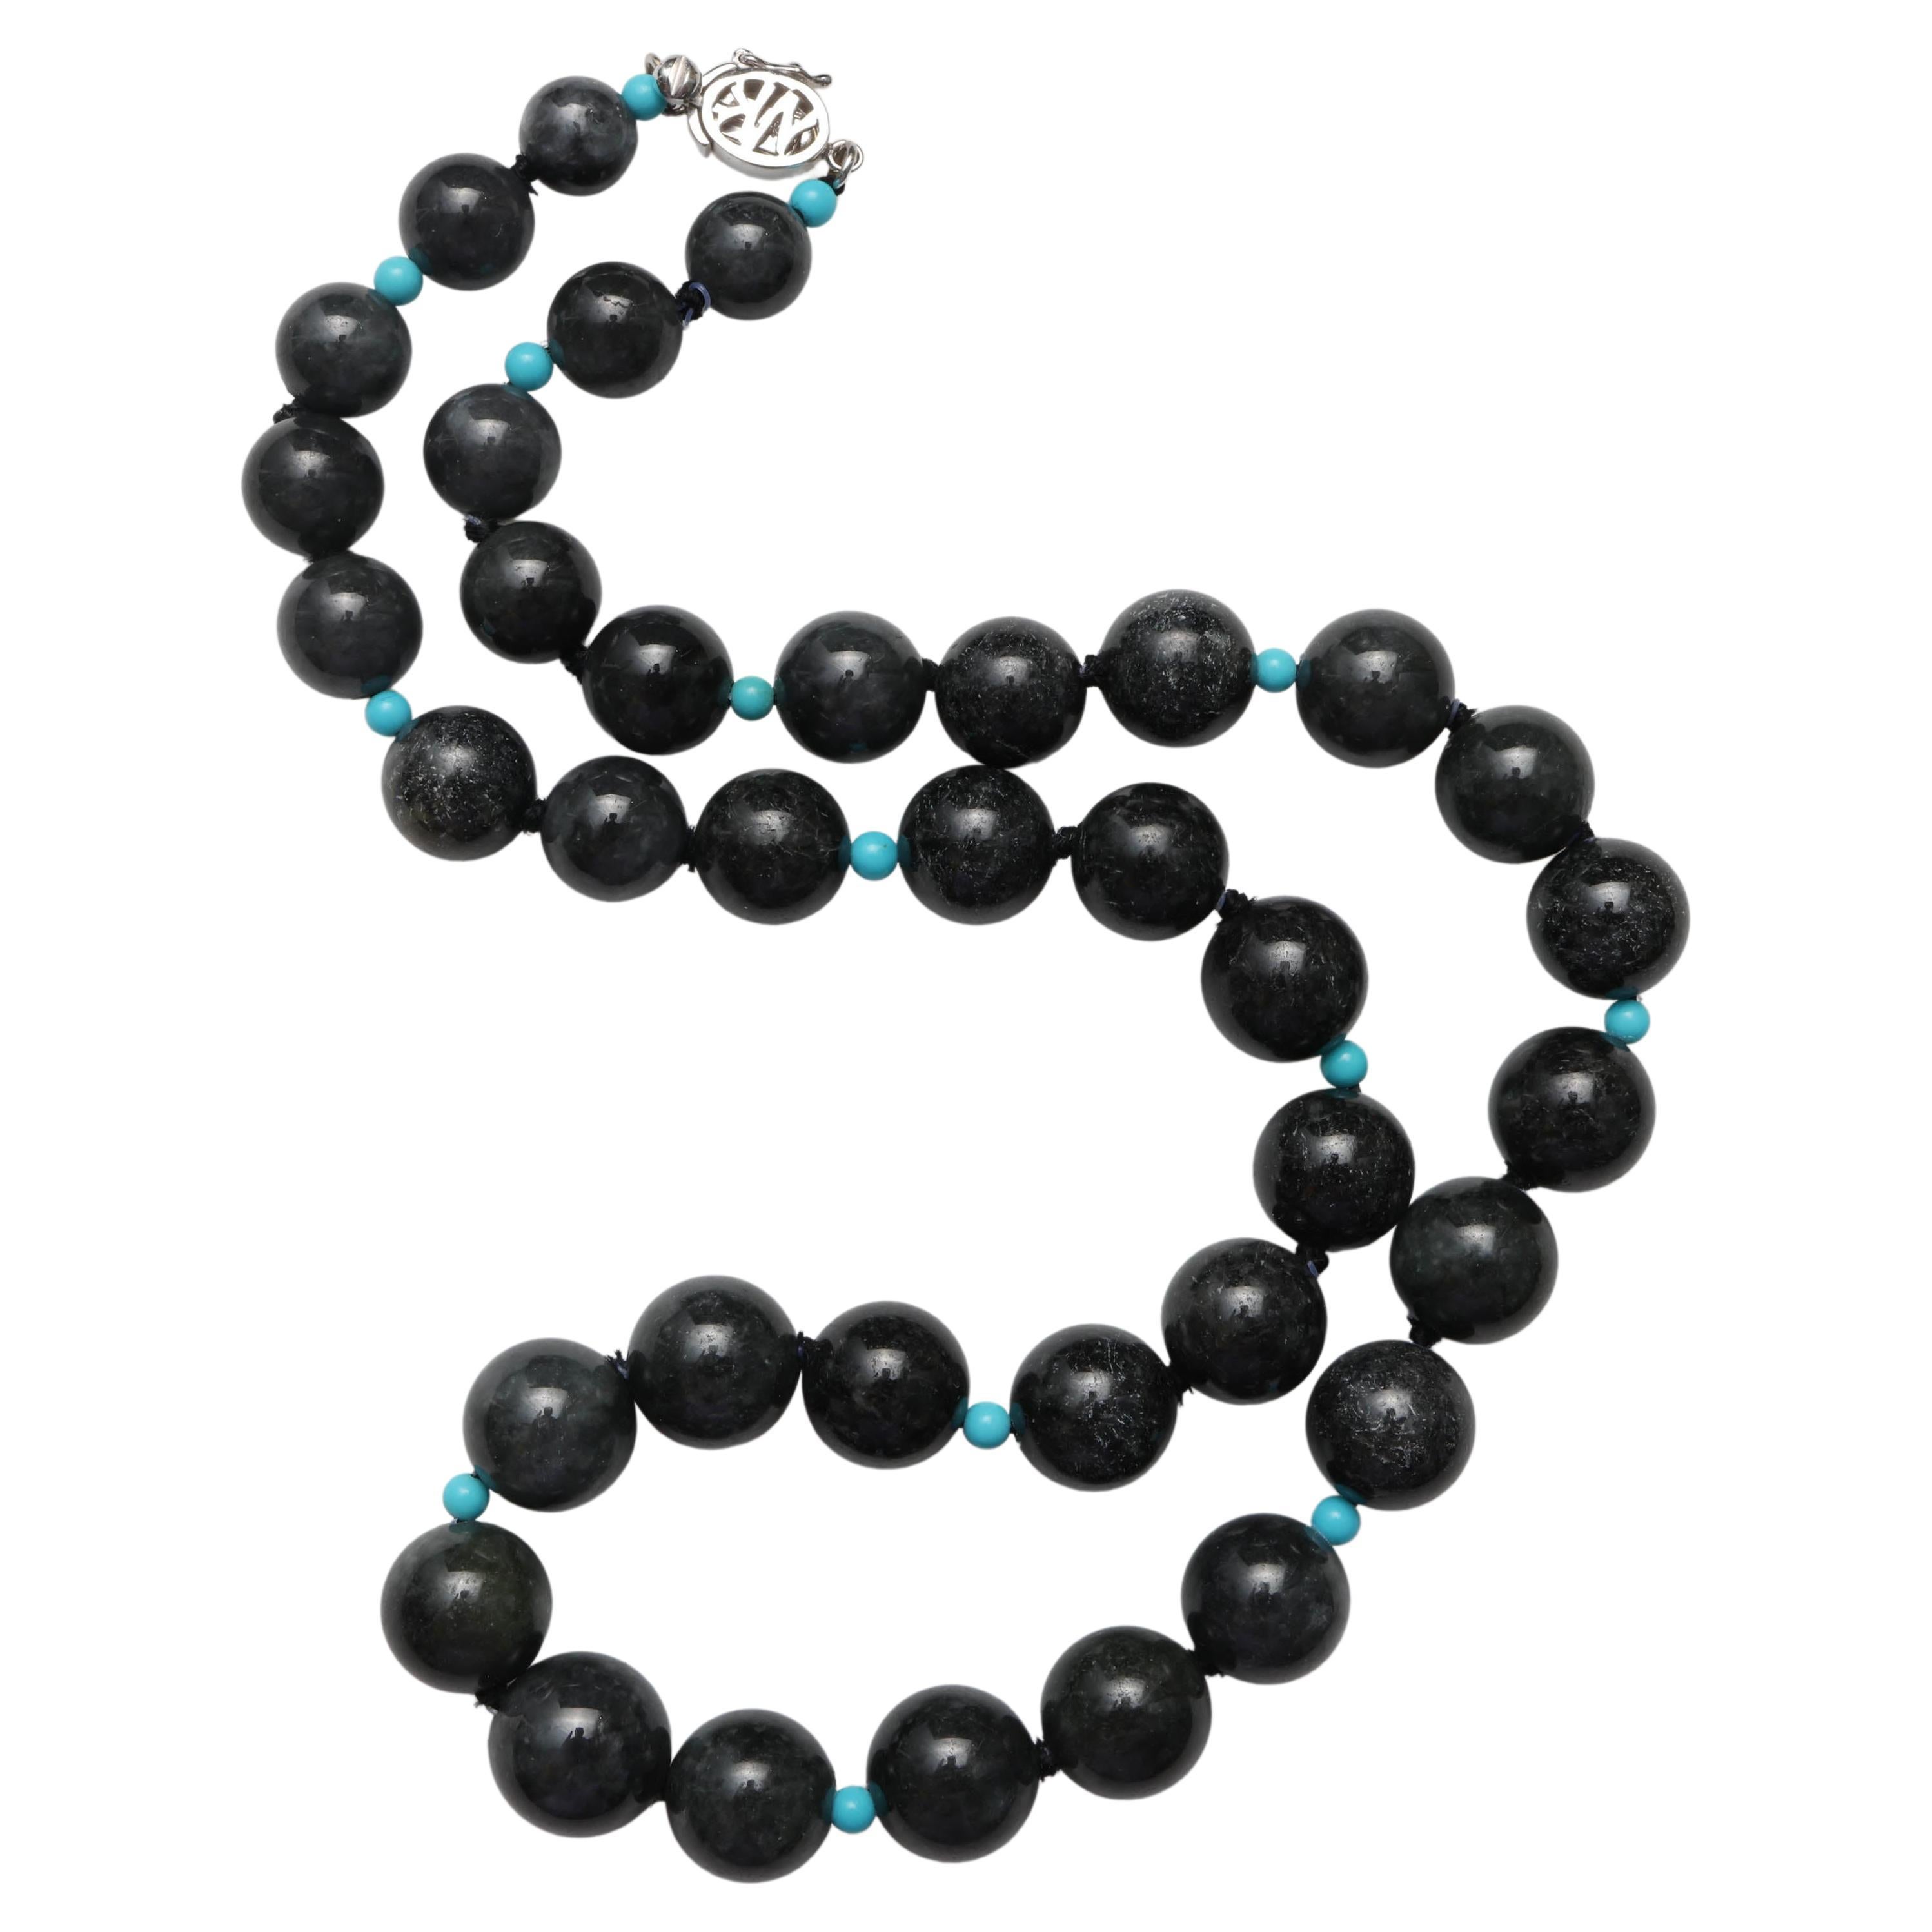 Black Jade Necklace with Turquoise Accent Beads Certified Untreated Jadeite Jade For Sale